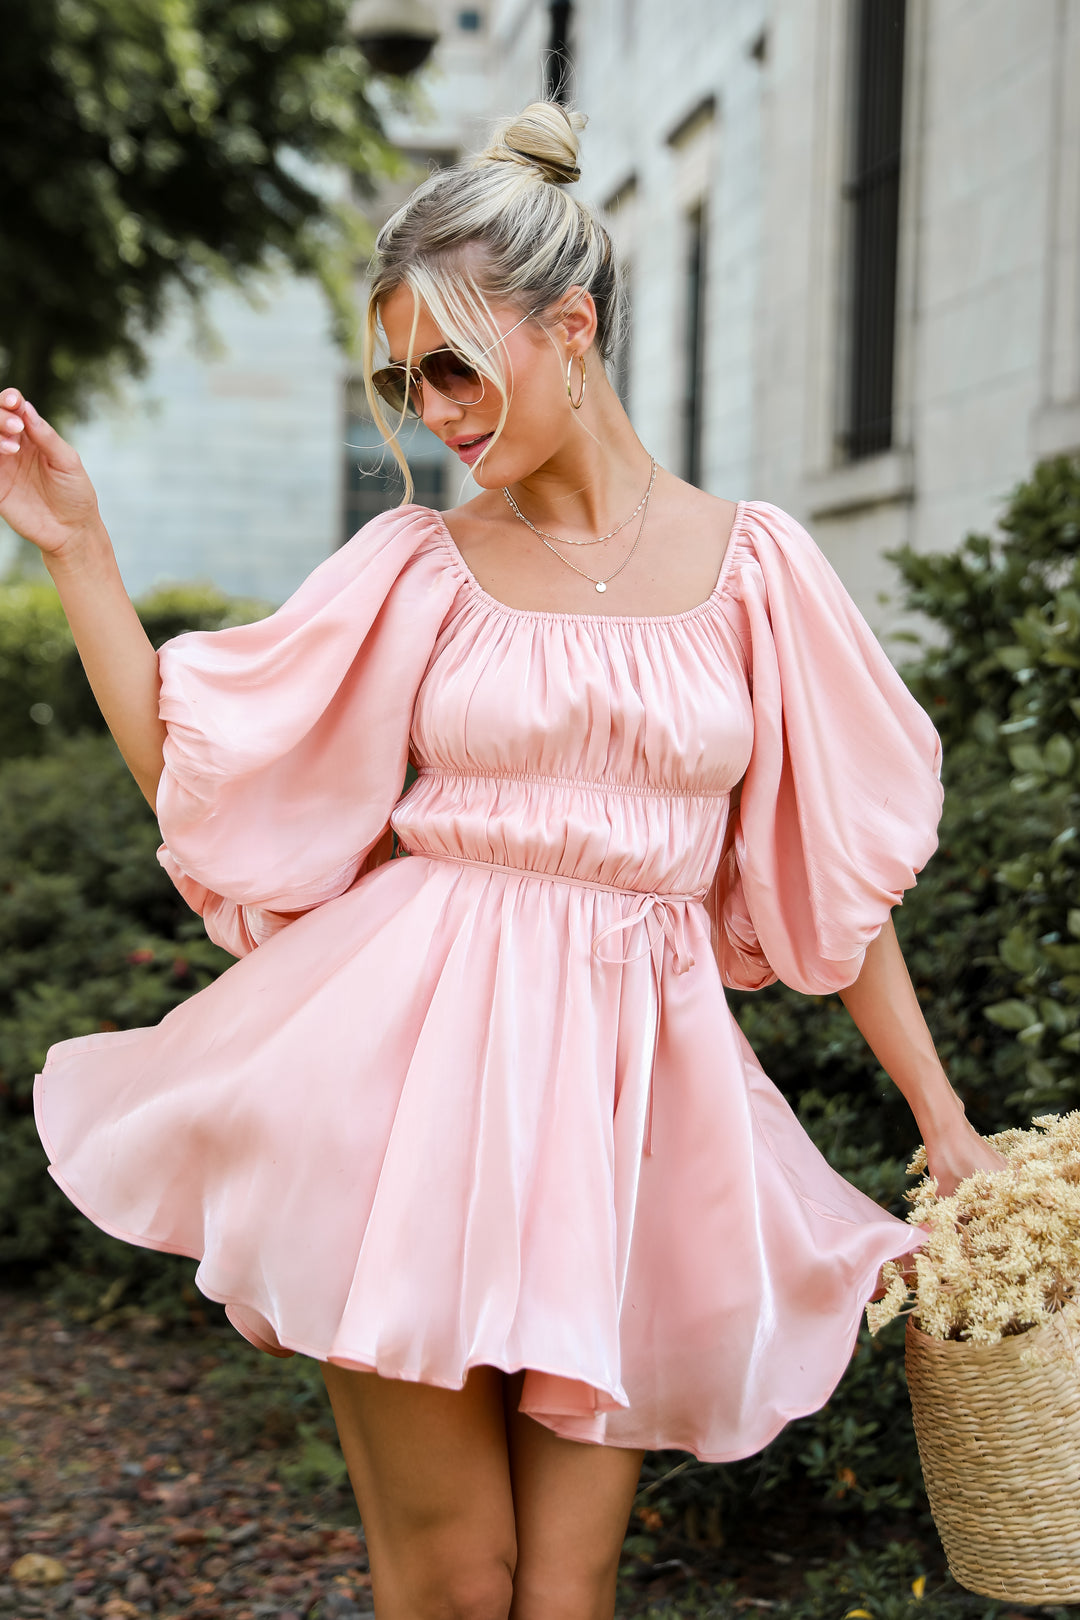 Indescribable Glow Blush Puff Sleeve Mini Dress for summer